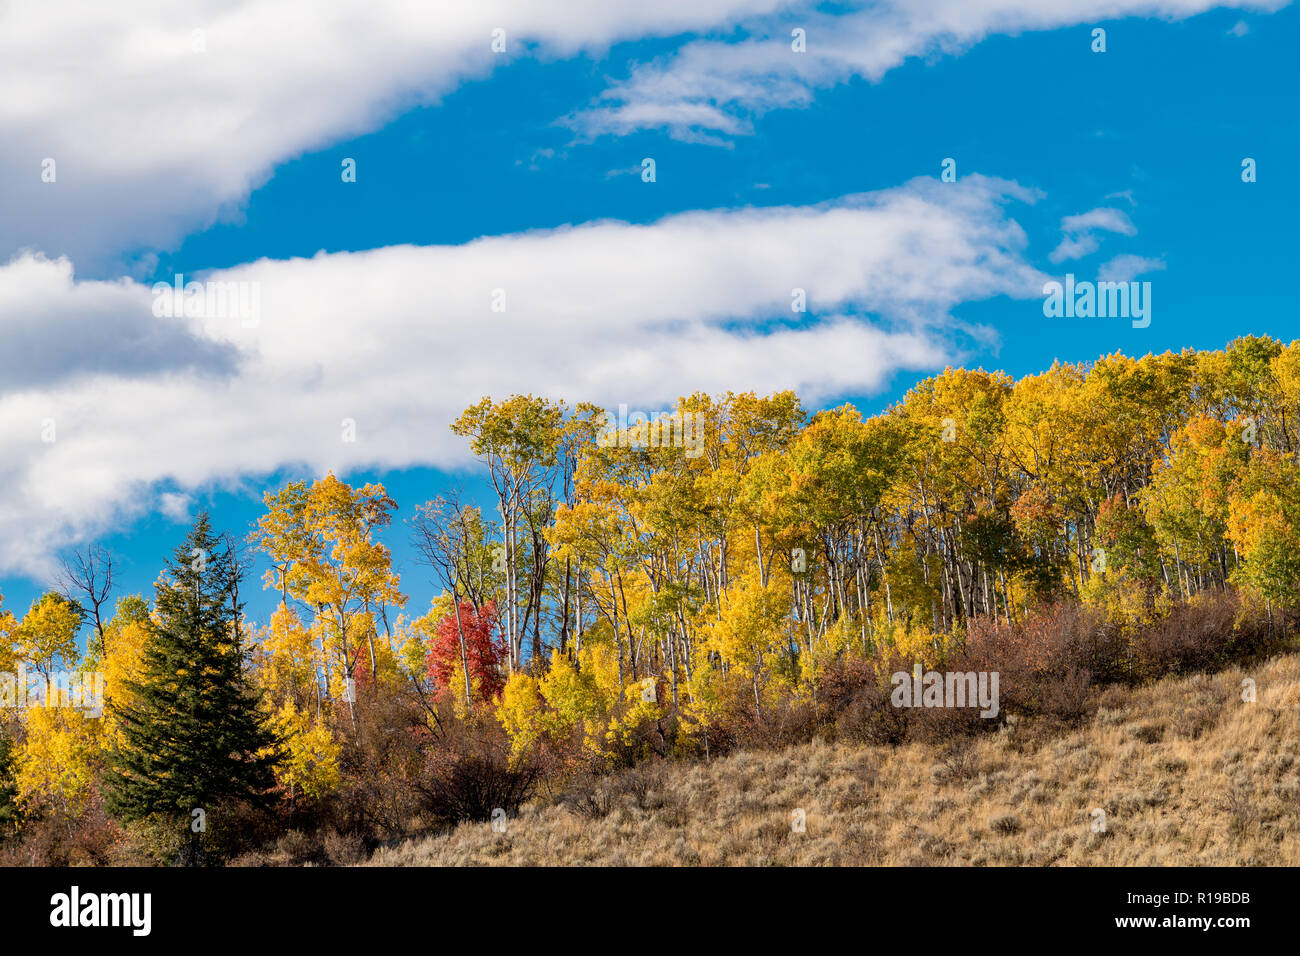 Blue sky with puffy clouds and a fall colored forest in nature Stock Photo